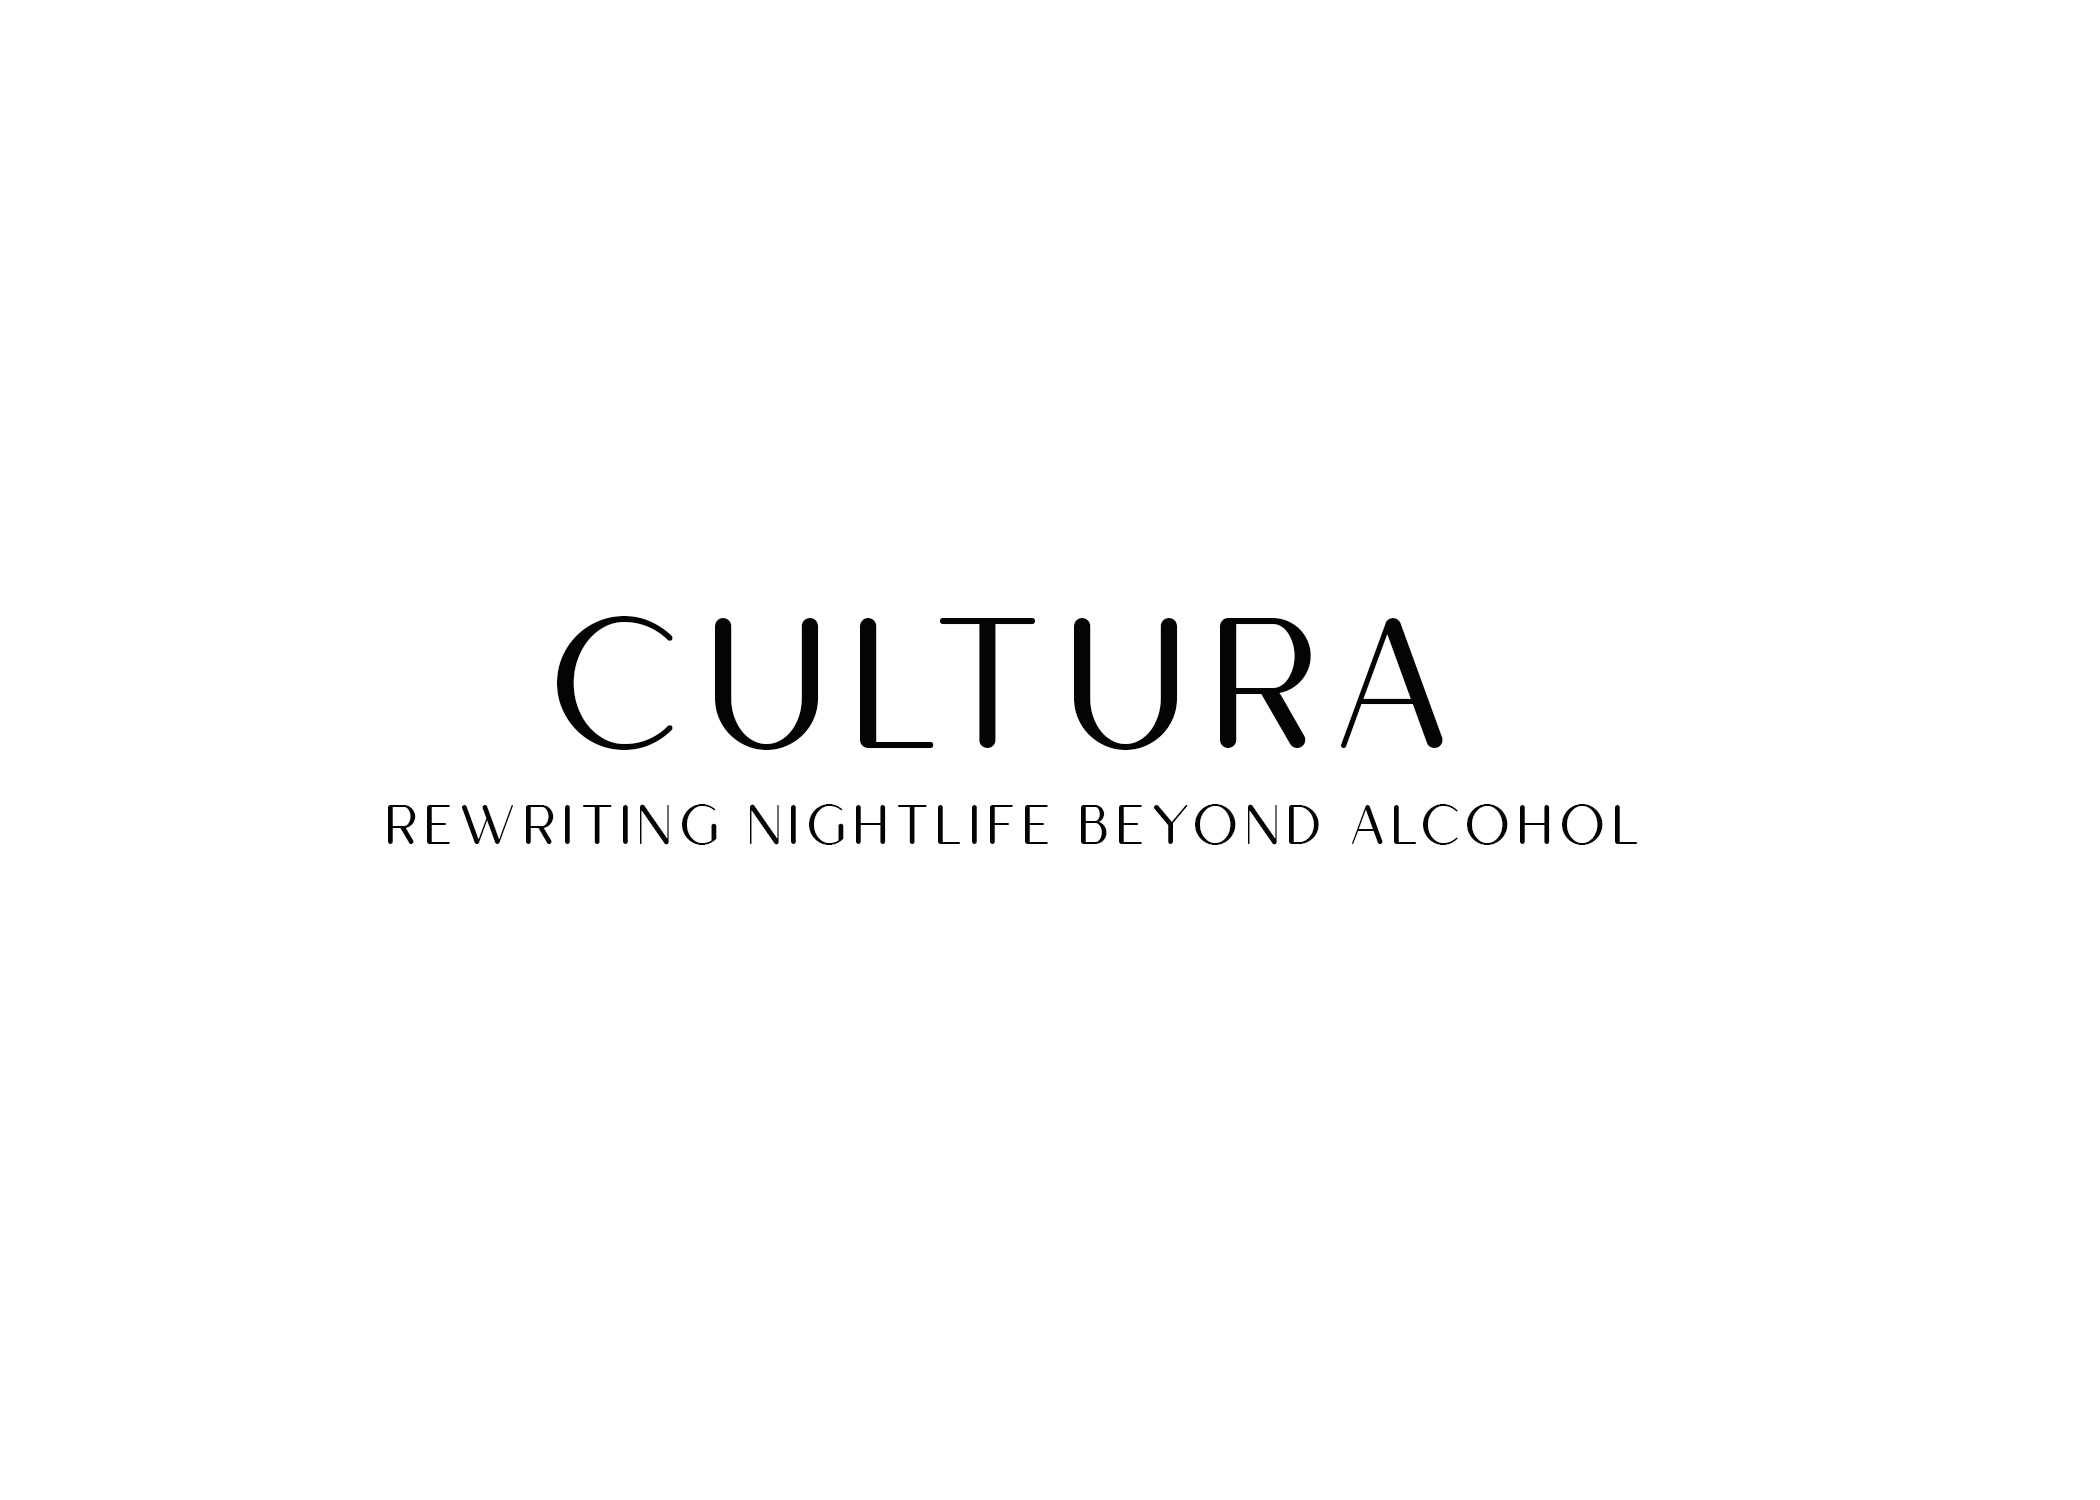 Cultura, Thursday, July 25, 2019, Press release picture